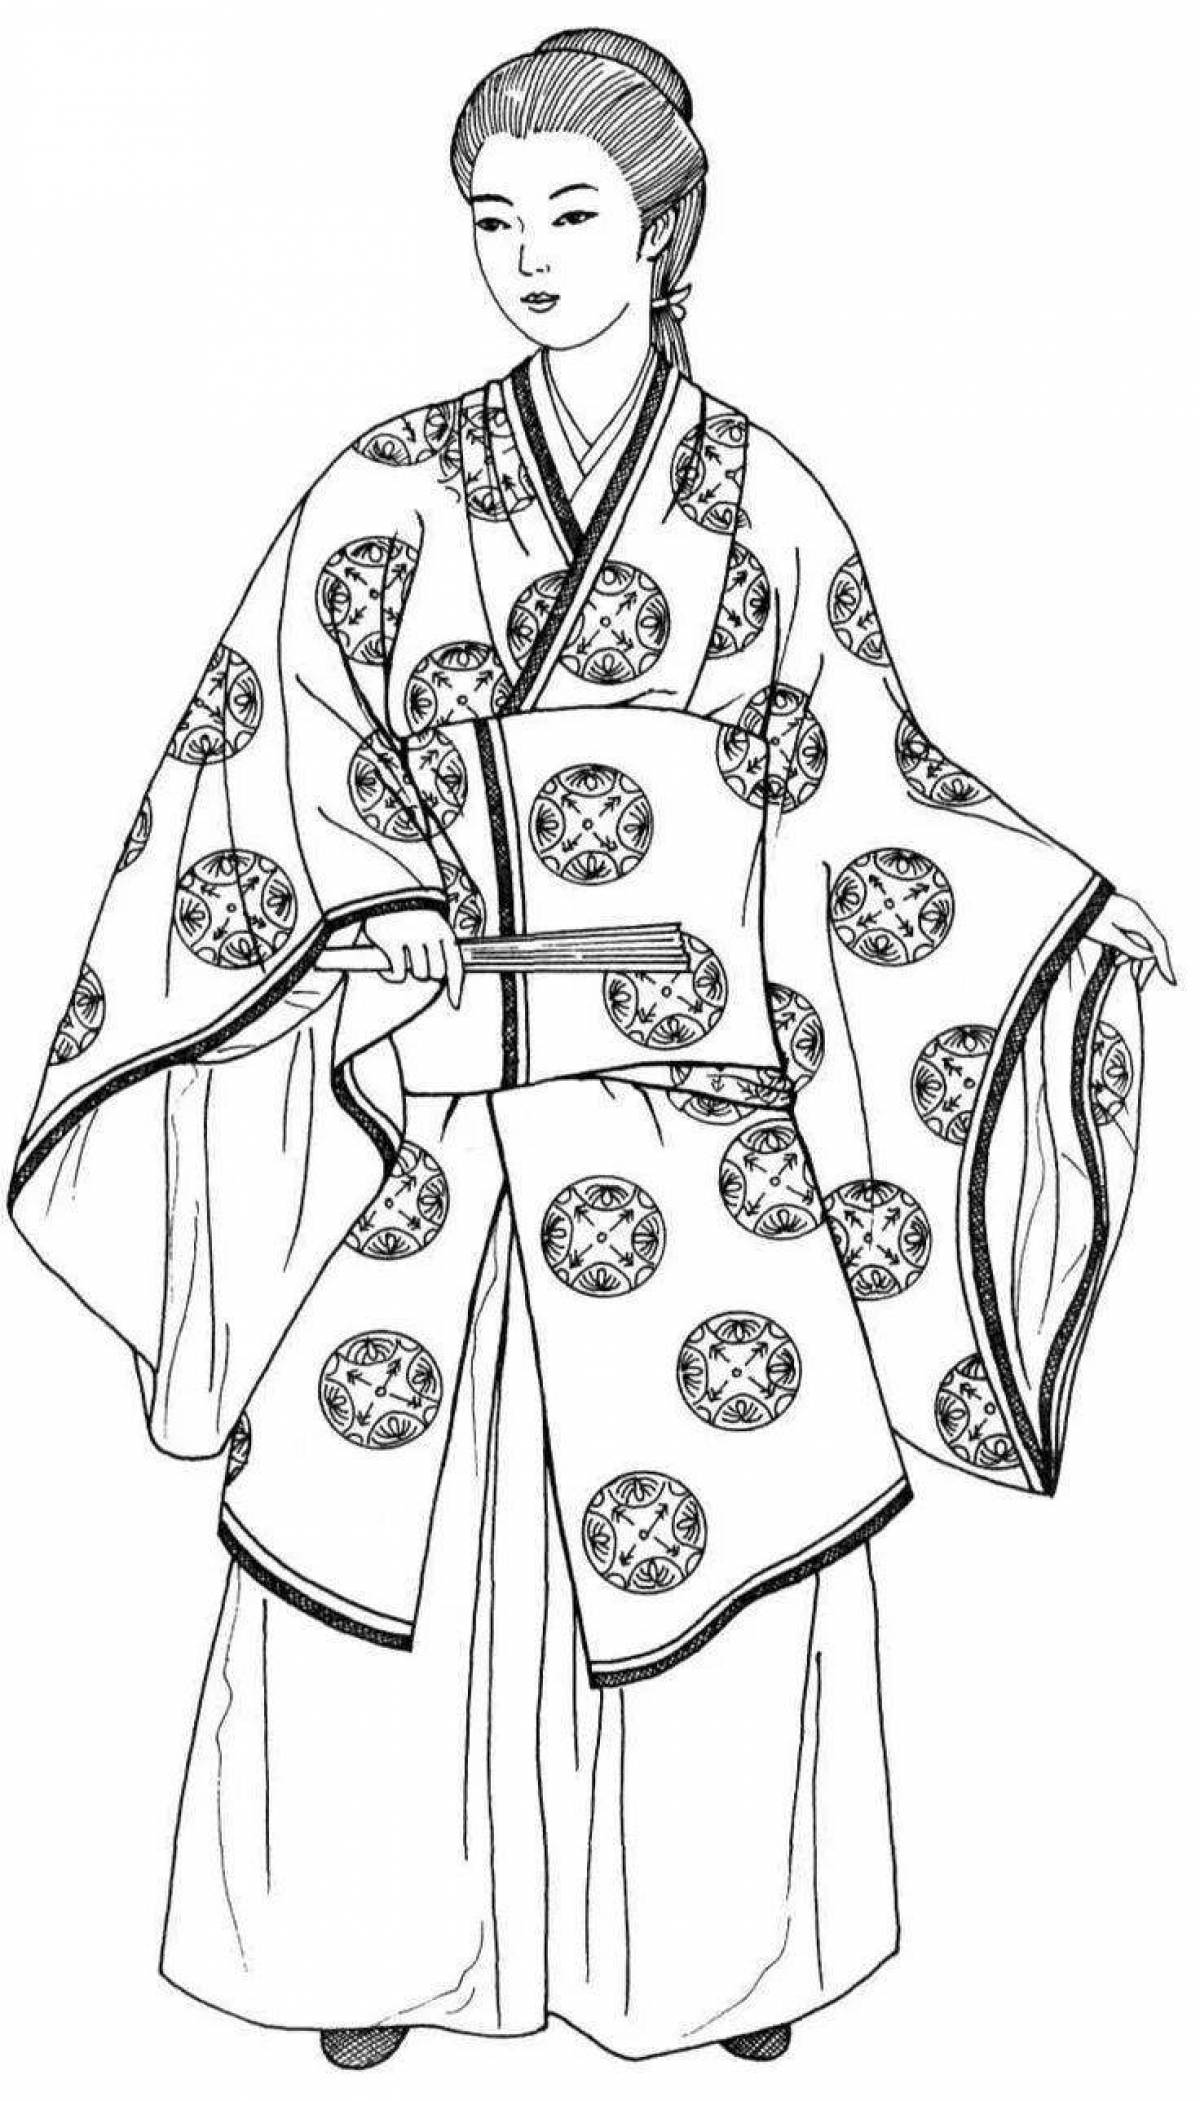 Coloring page with colorful Chinese costume